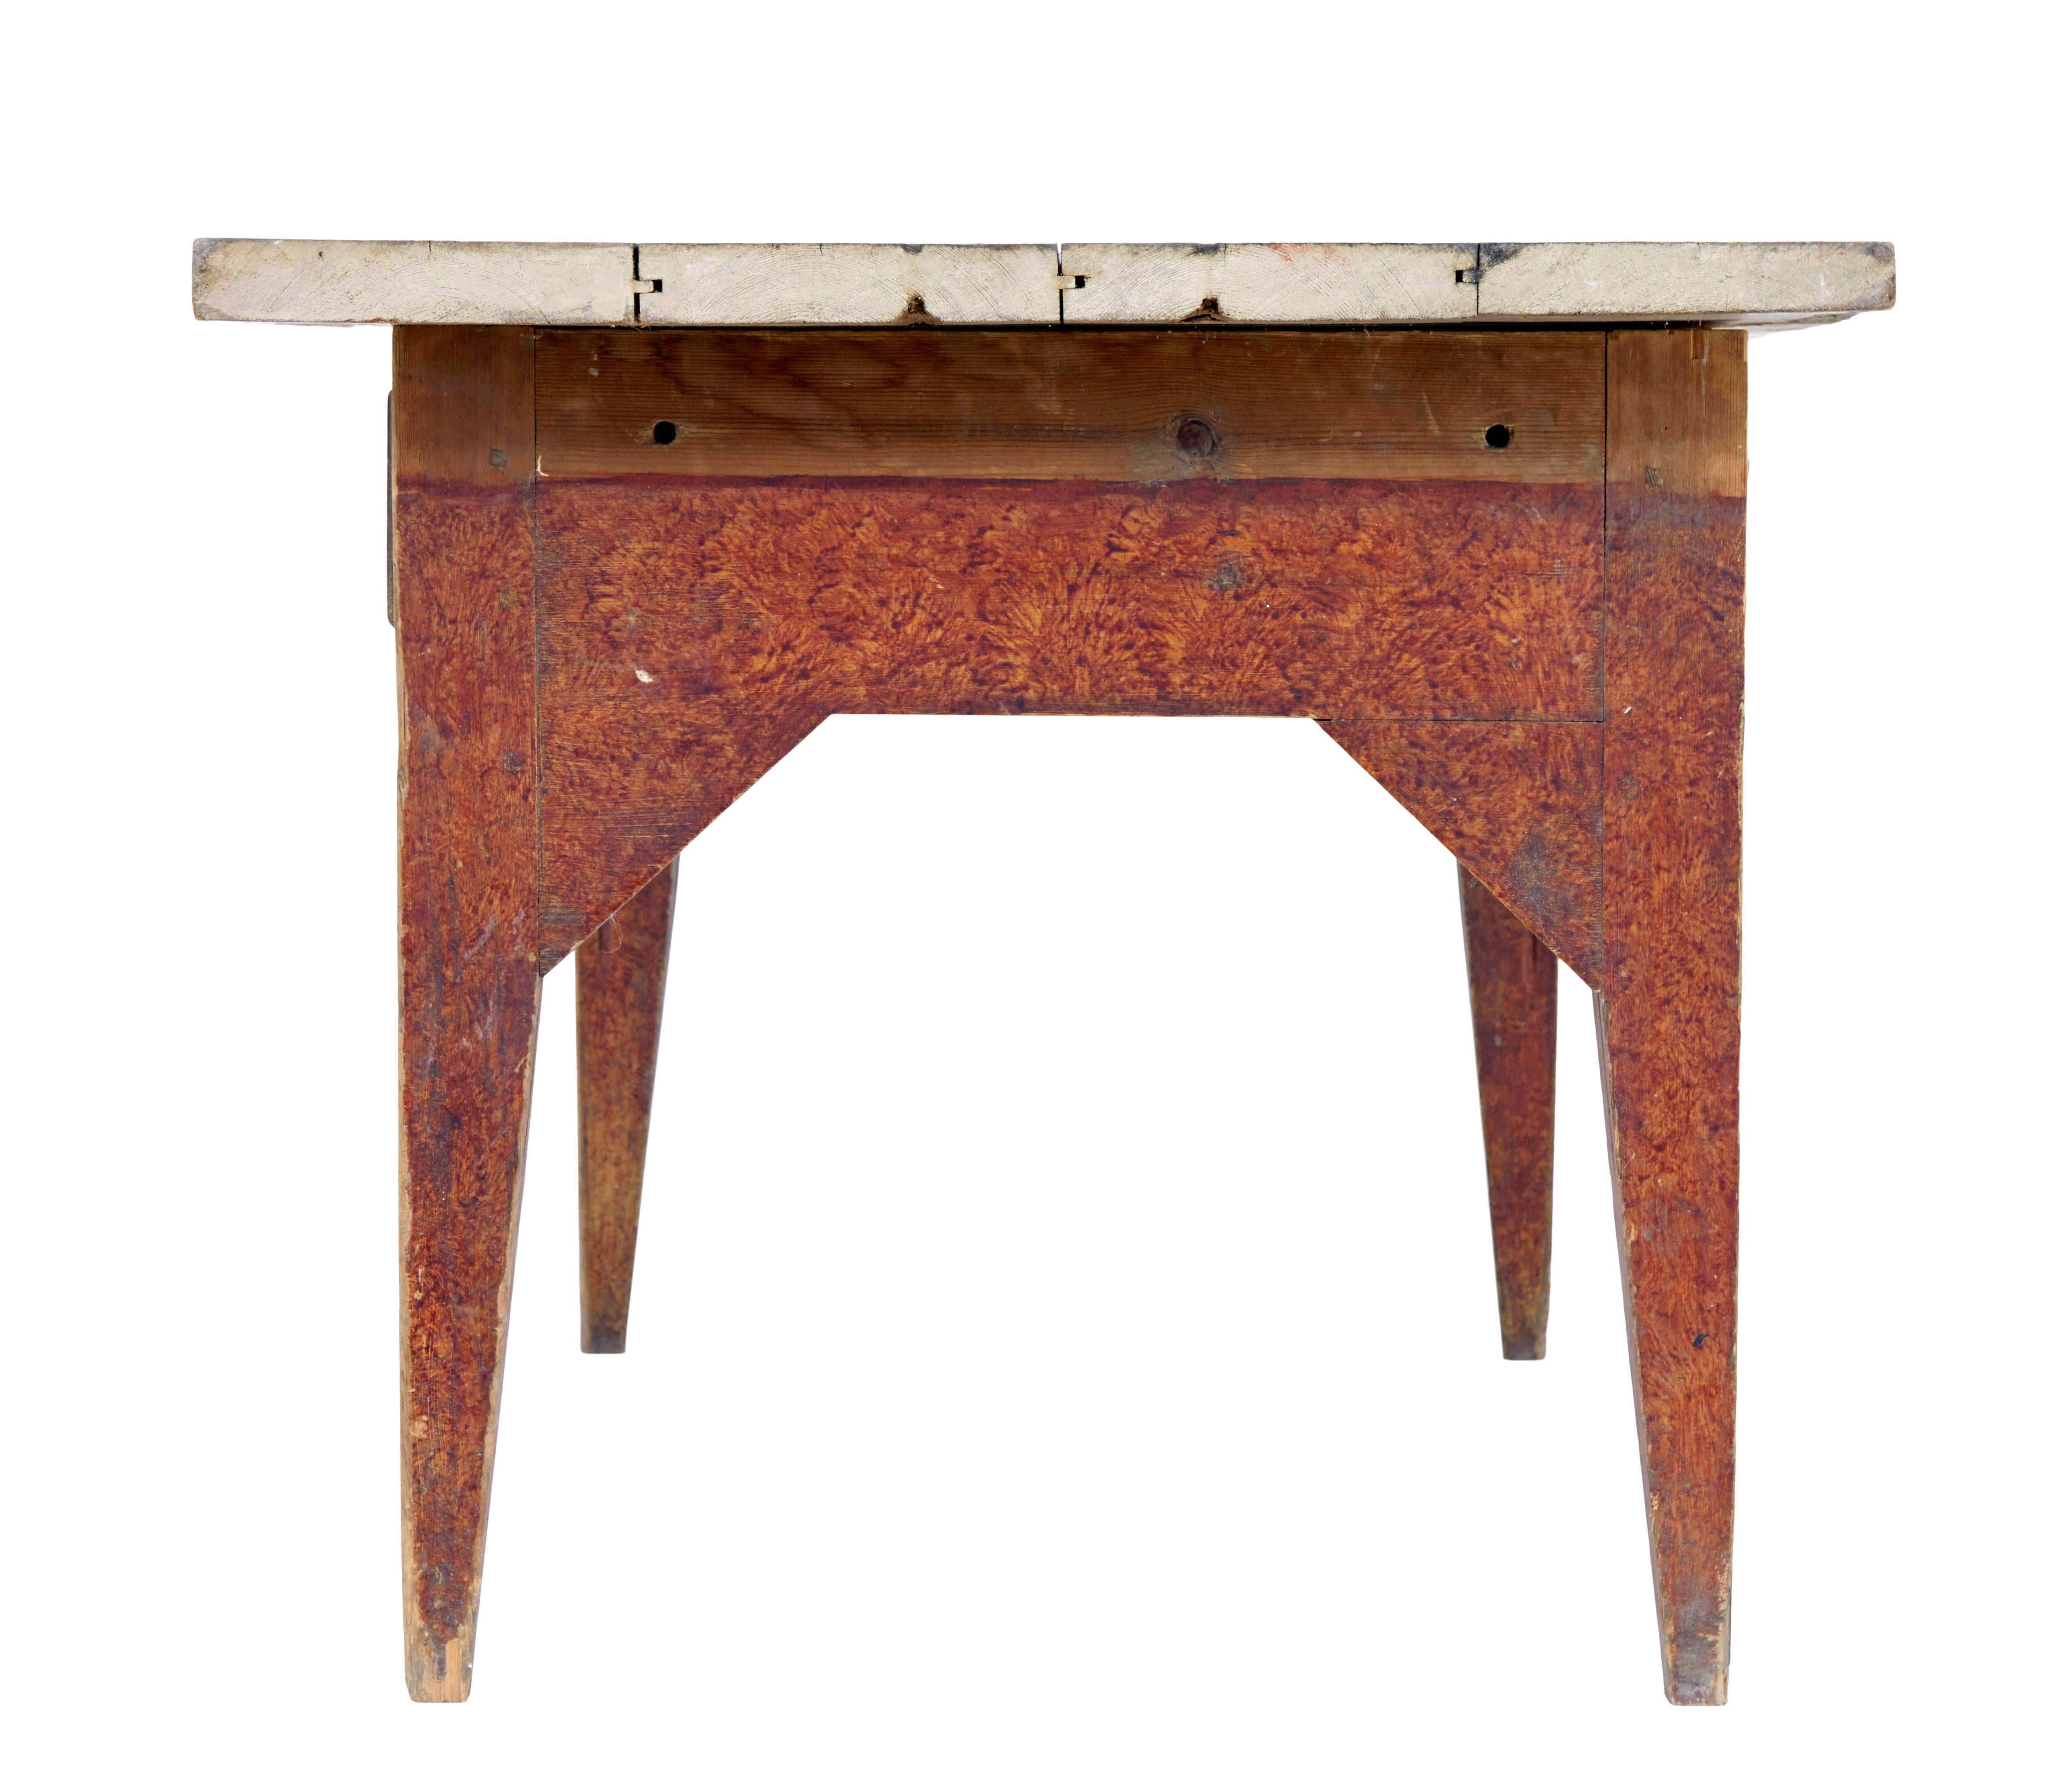 Hand-Crafted Mid 19th Century rustic painted pine kitchen table For Sale